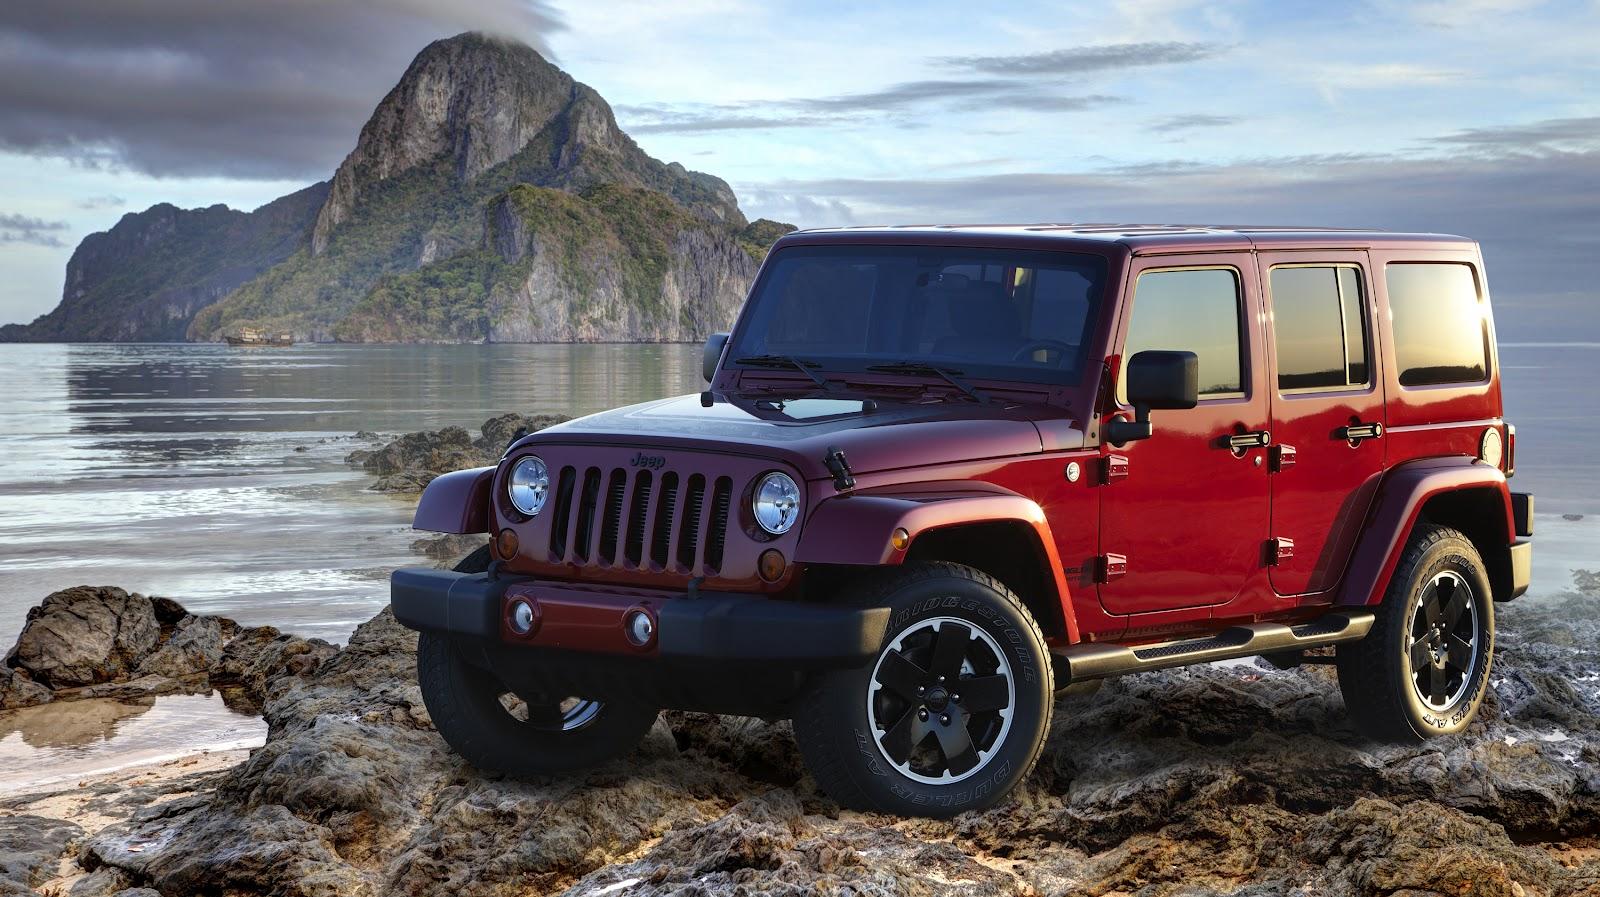 Jeep Wrangler Wallpaper HD Photo, Wallpaper and other Image